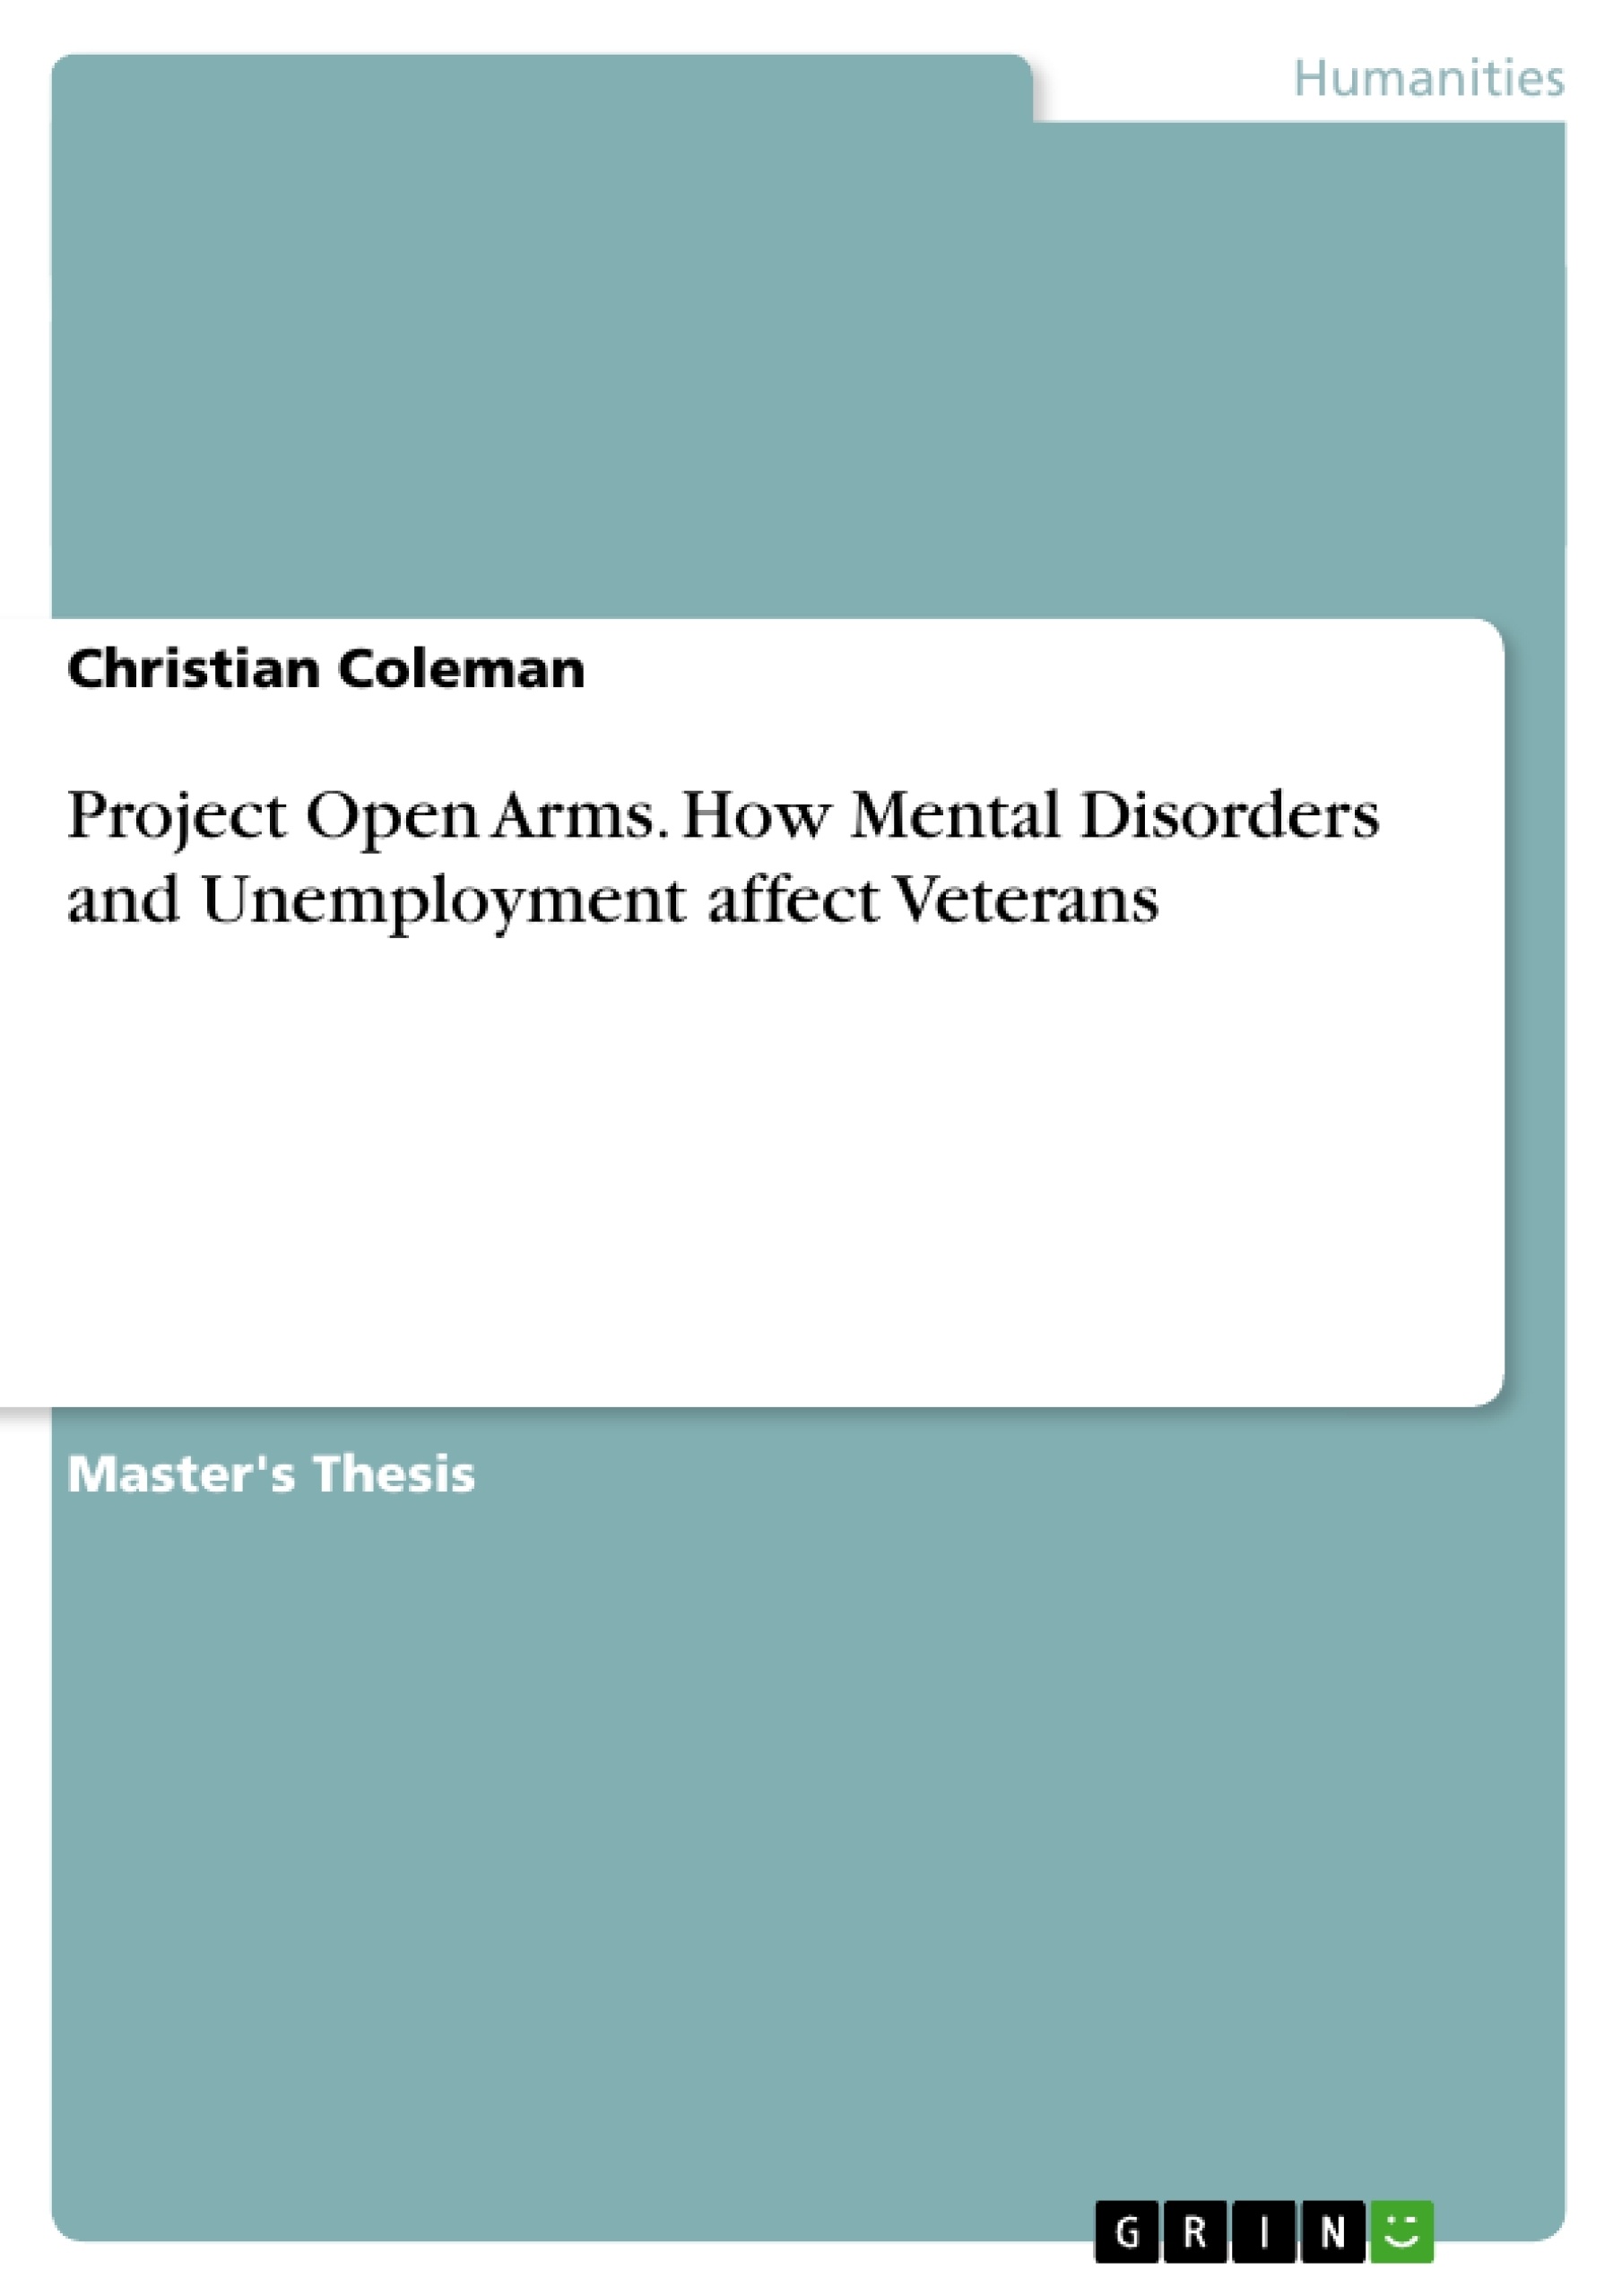 Title: Project Open Arms. How Mental Disorders and Unemployment affect Veterans